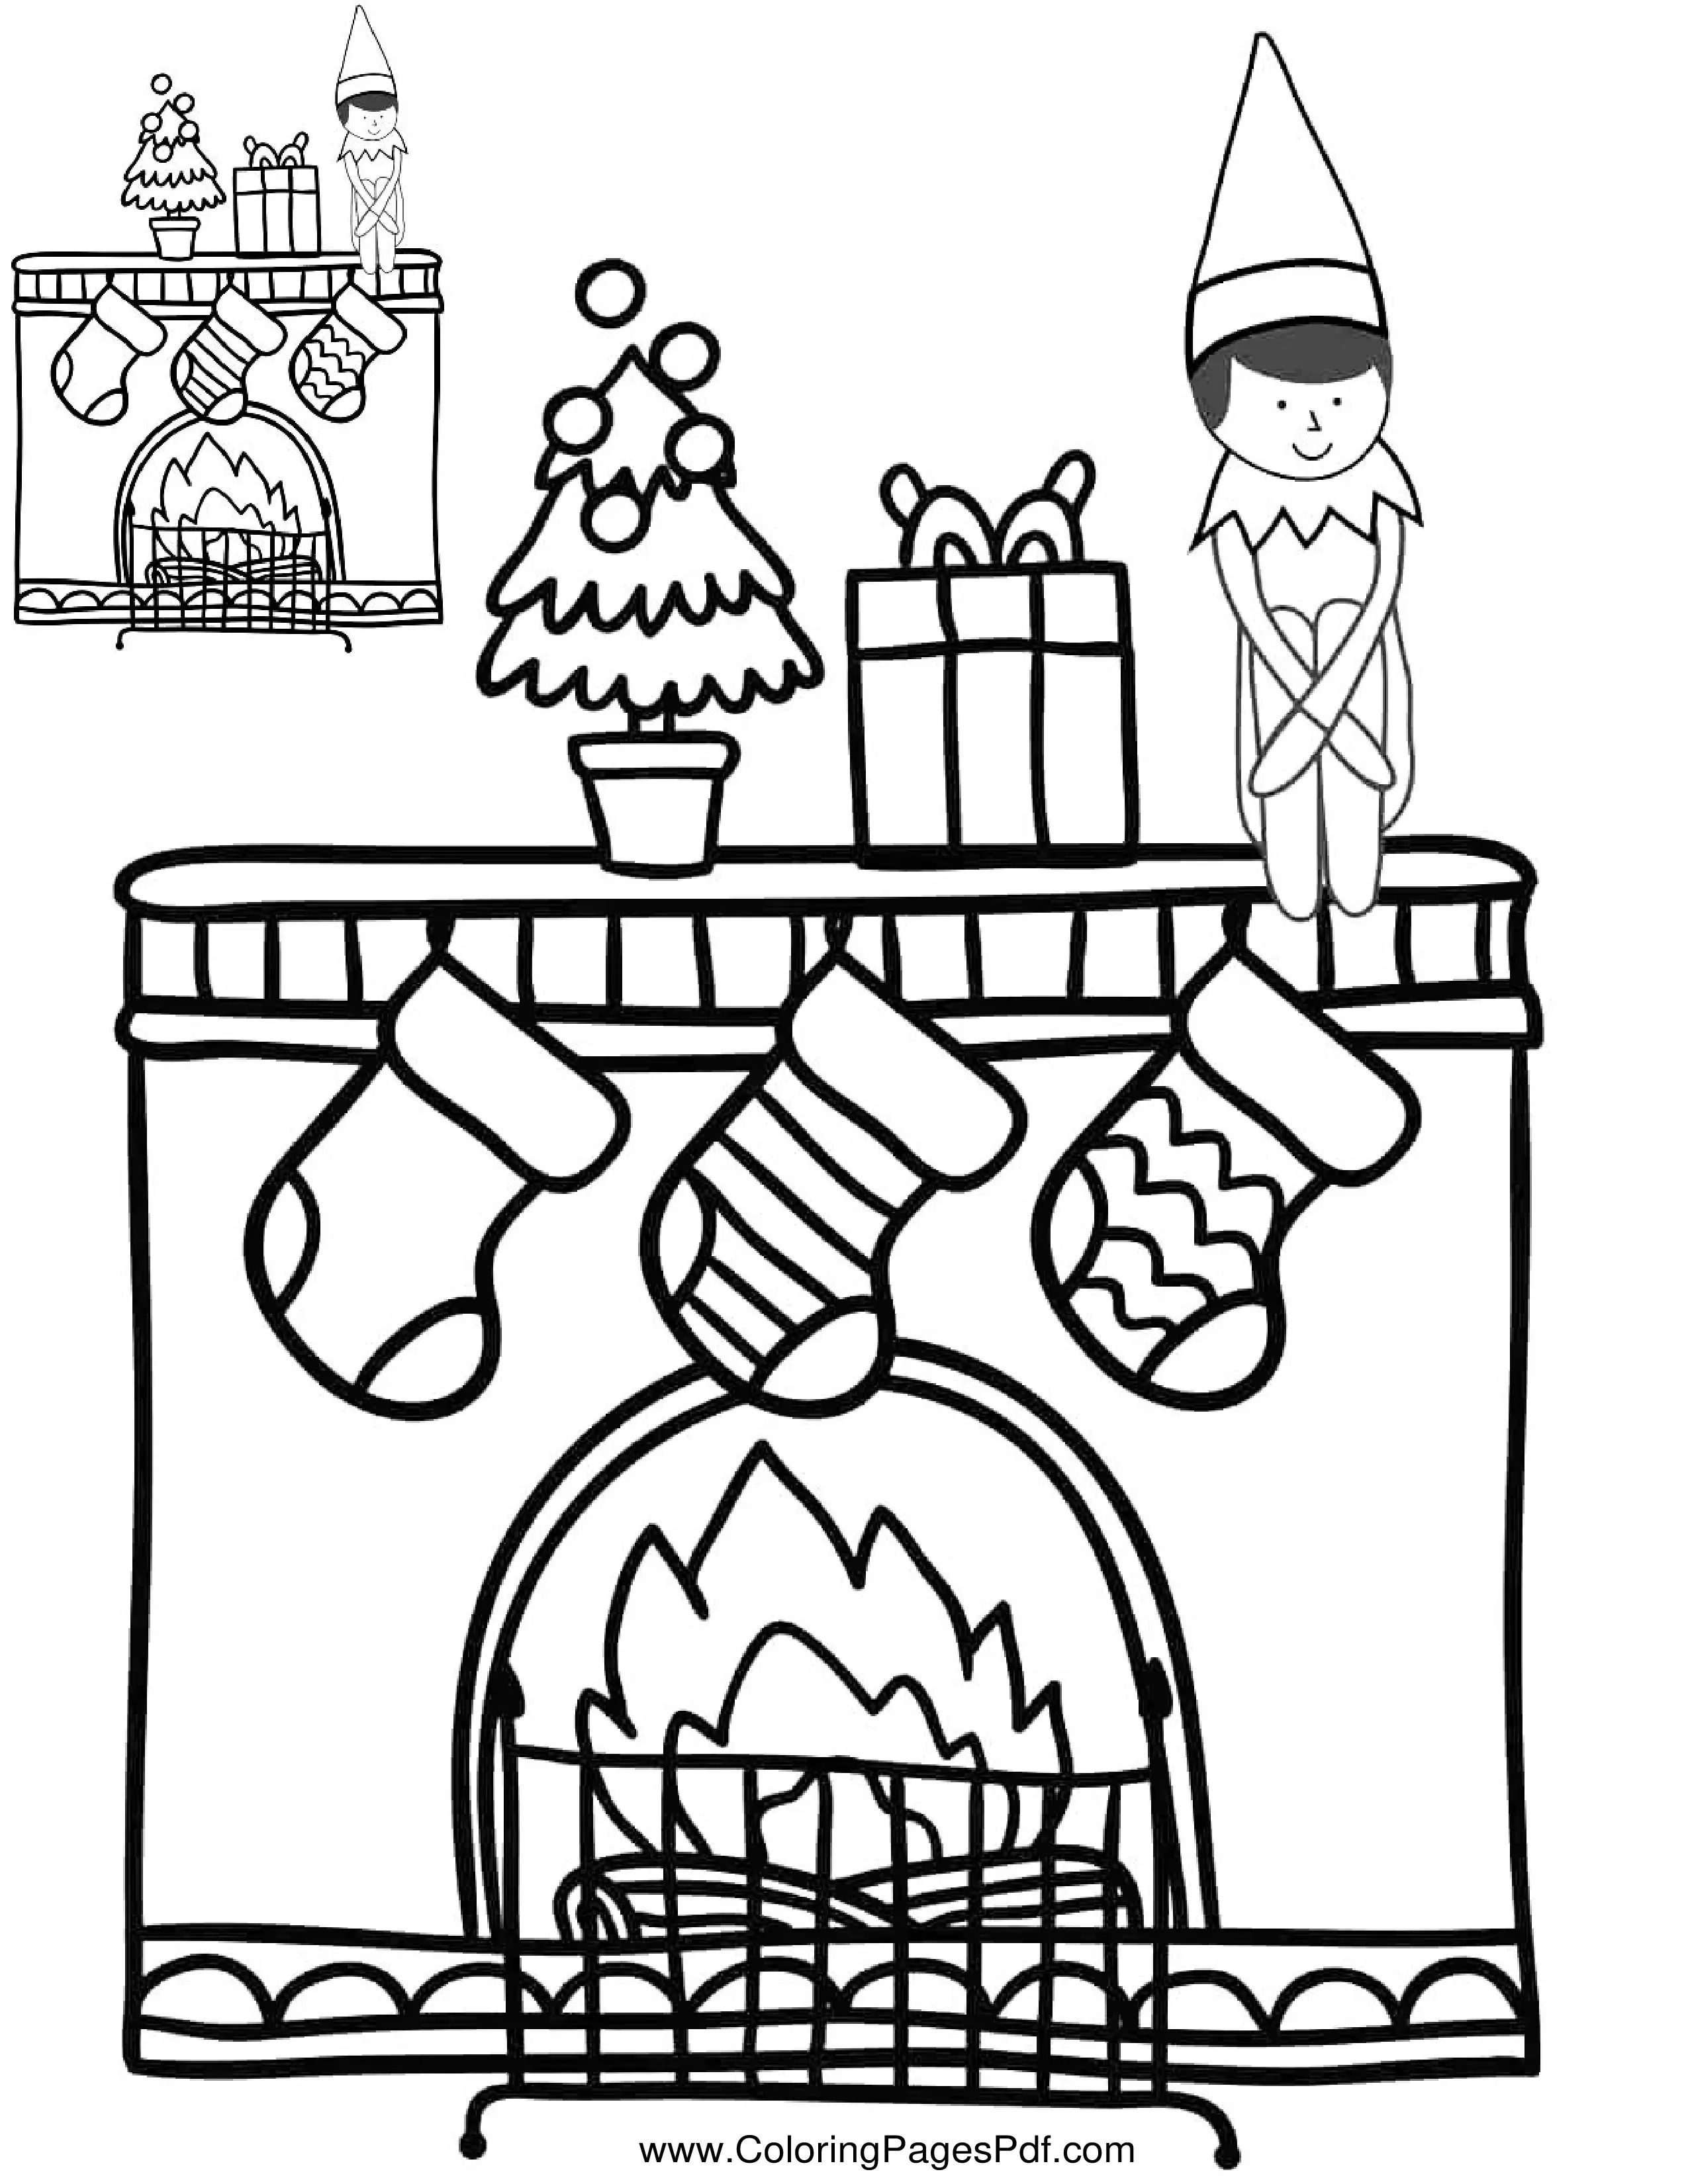 Cute elf on the shelf coloring pages